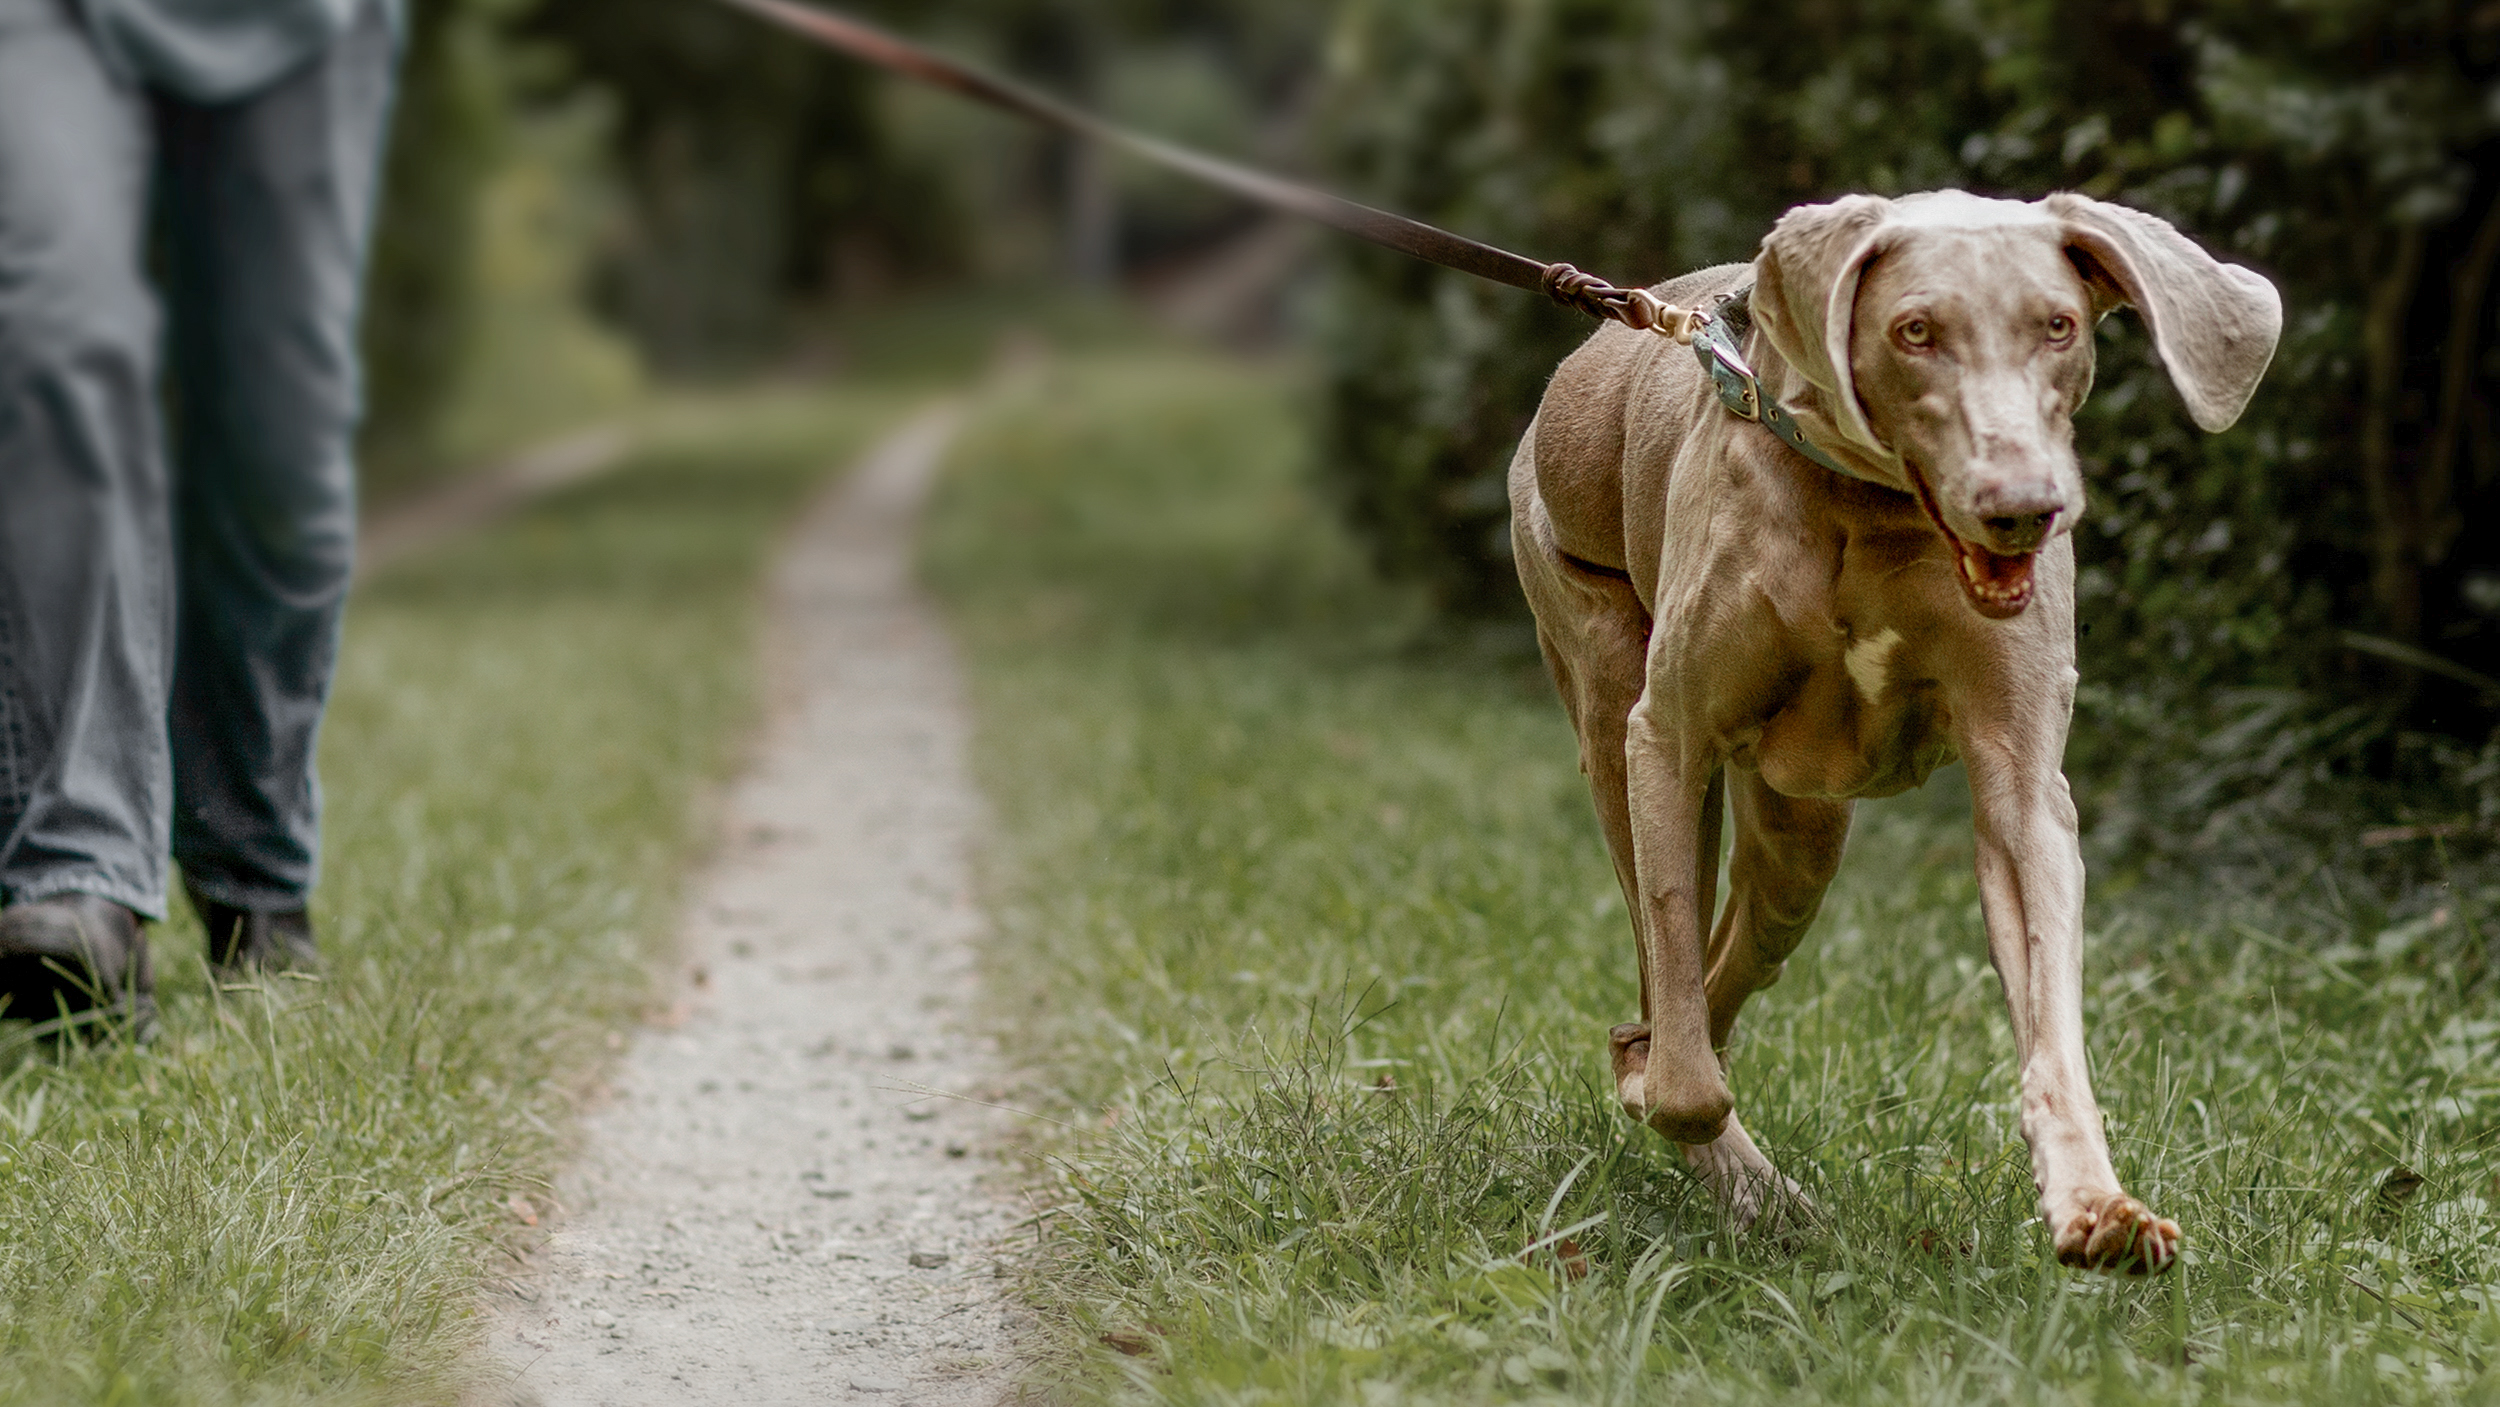 Ageing Weimaraner walking outdoors on a grassy footpath.